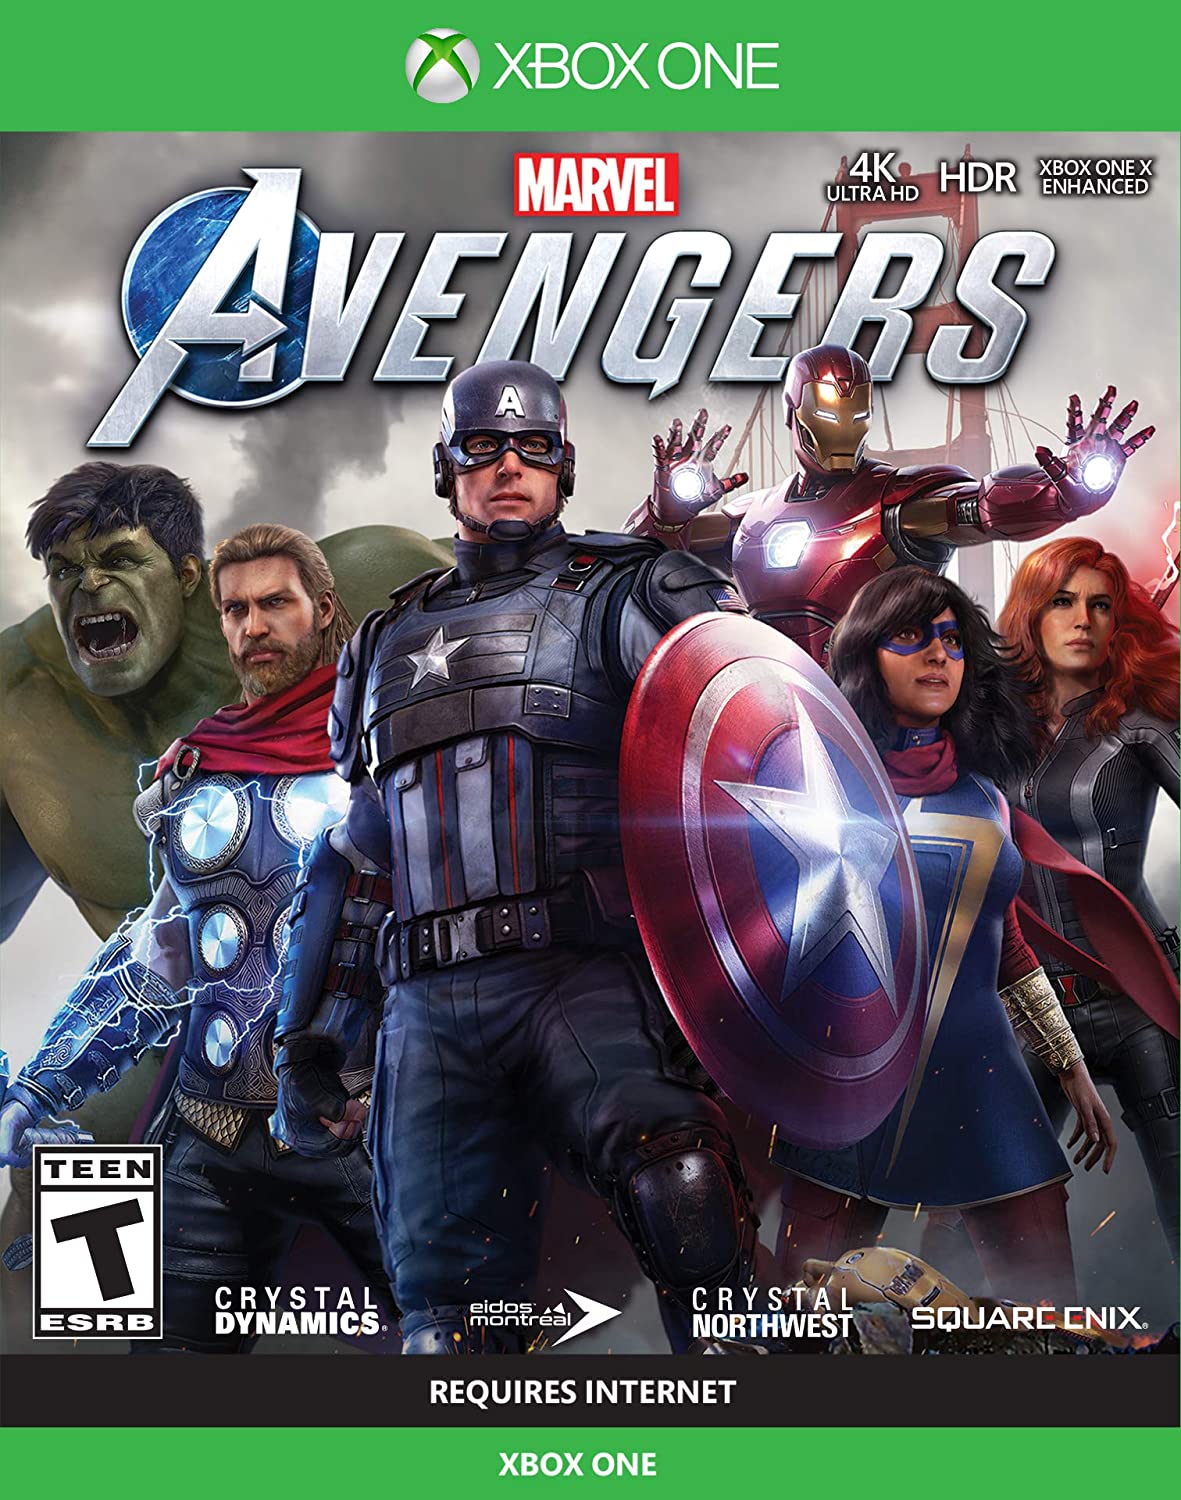 Marvel's Avengers with SteelBook - (XB1) Xbox One [Pre-Owned] Video Games Square Enix PRE-OWNED GAME DISC WITH STEELBOOK  